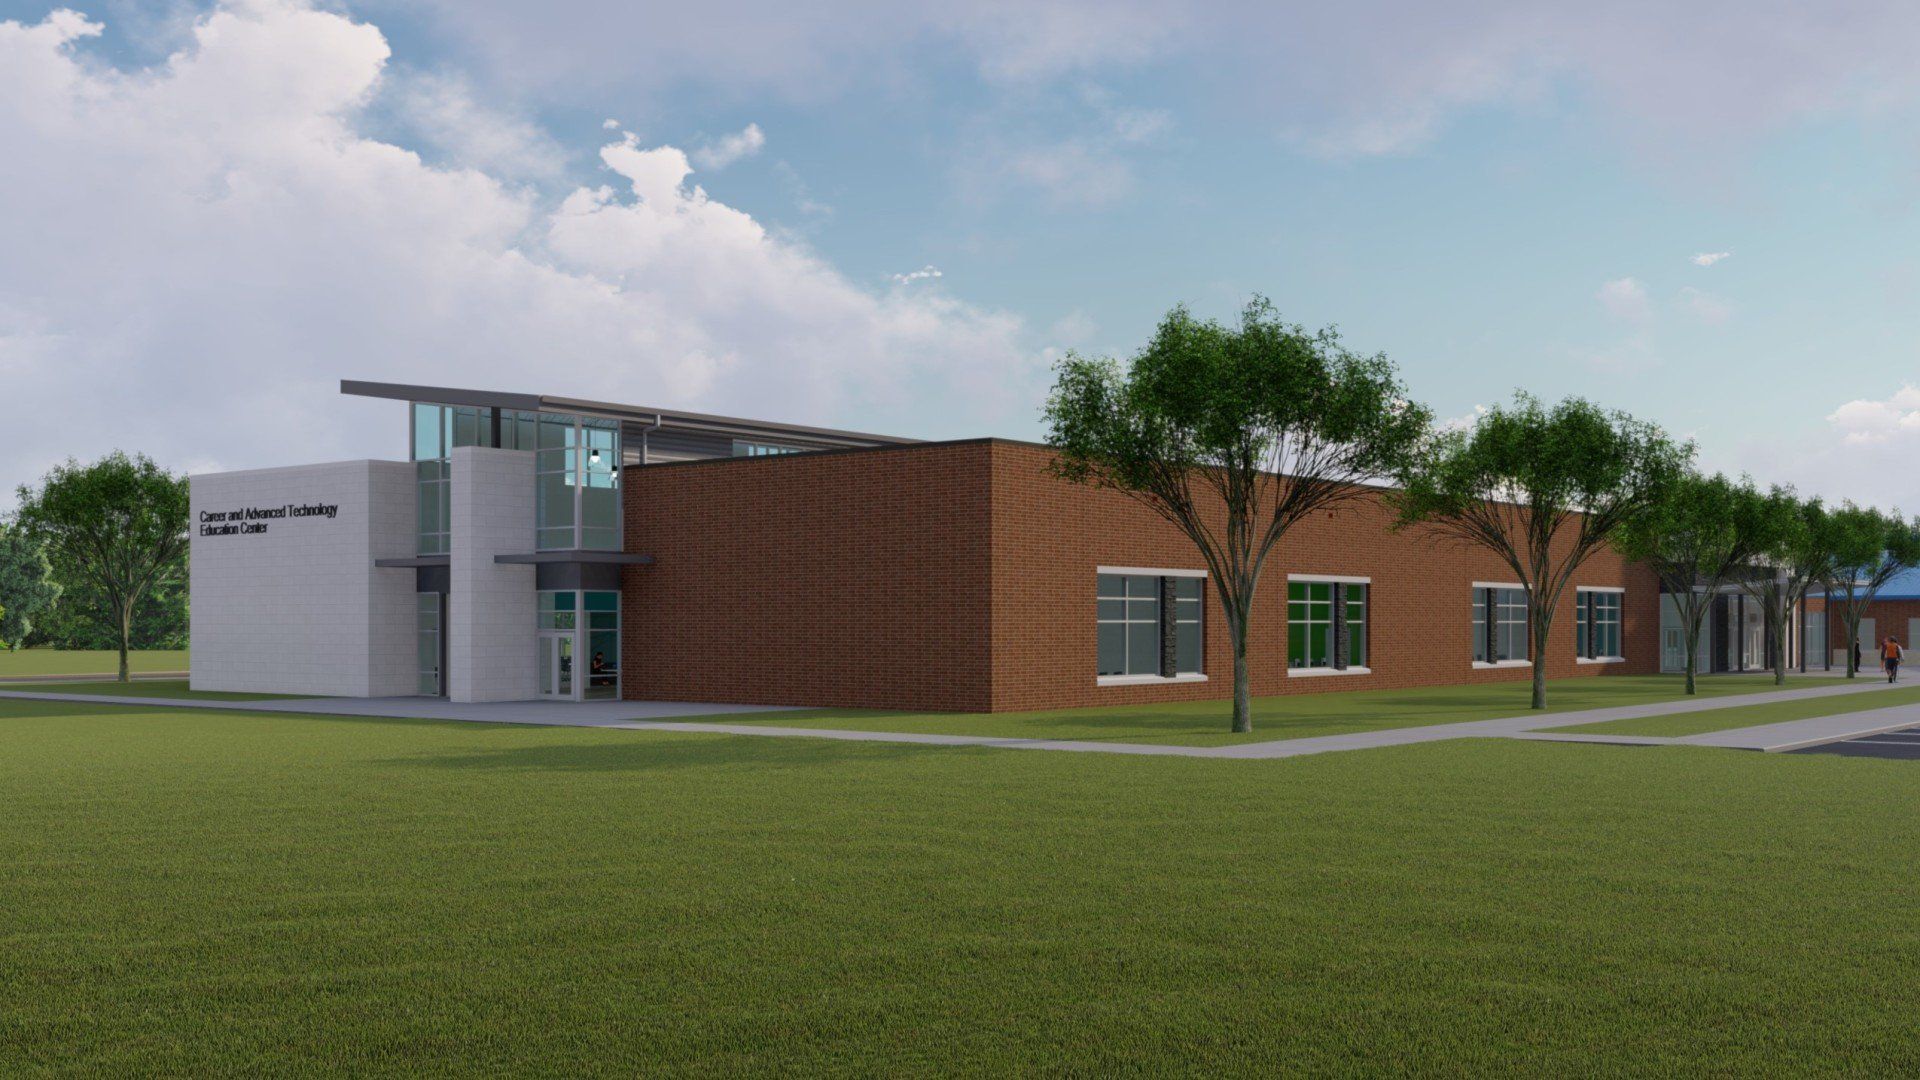 an artist 's impression of a new school building .